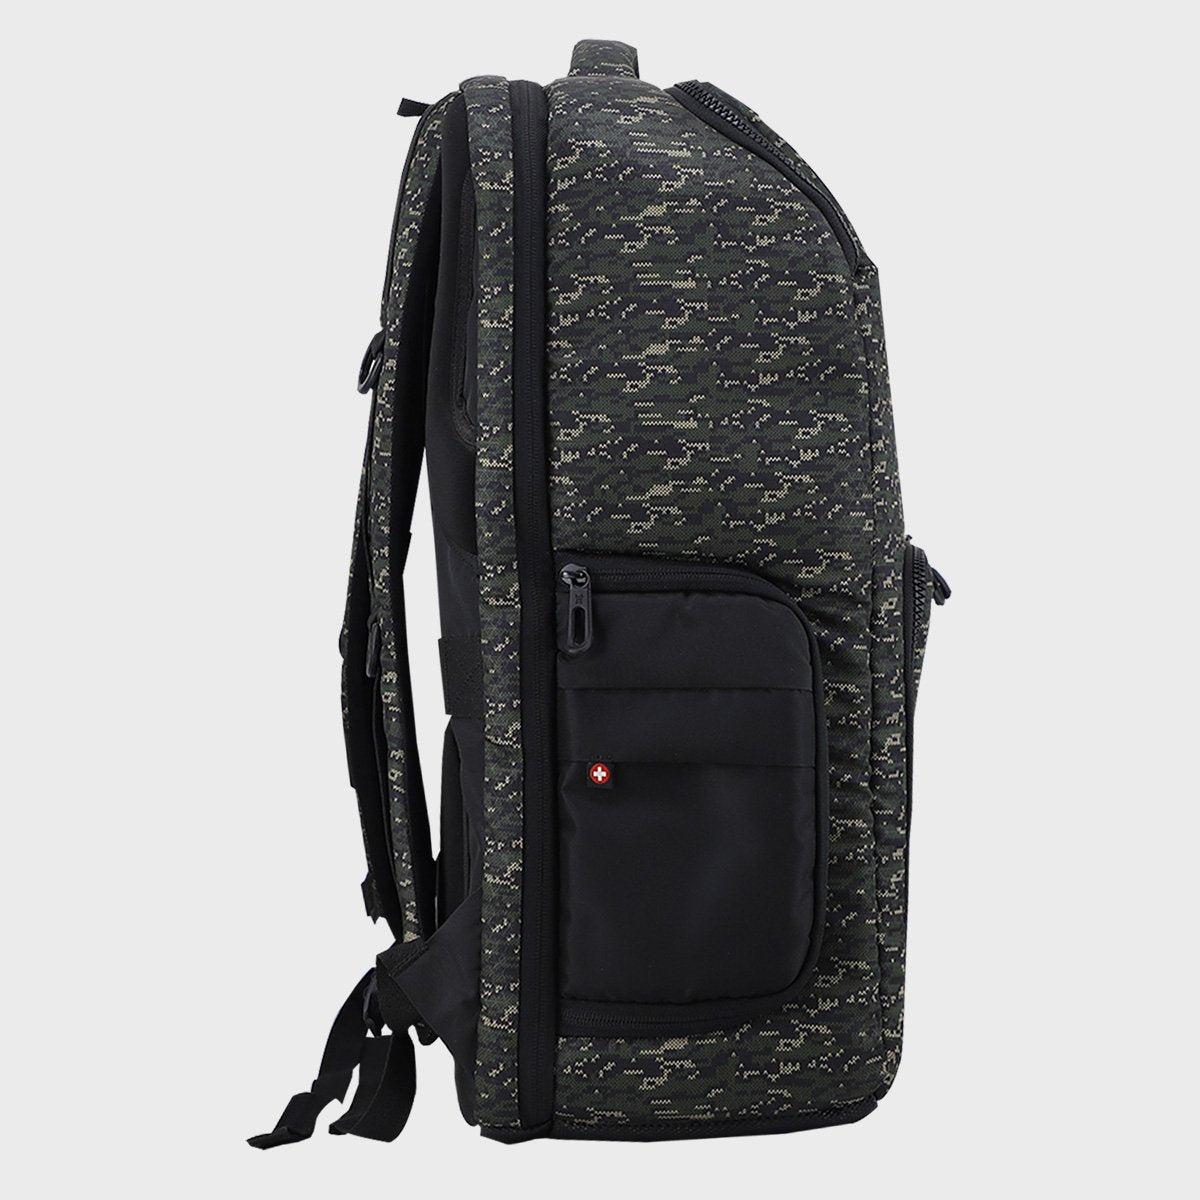 Arctic Fox Polaroid Olive Professional Dslr Camera Bag and Camera Backpack With Laptop Compartment